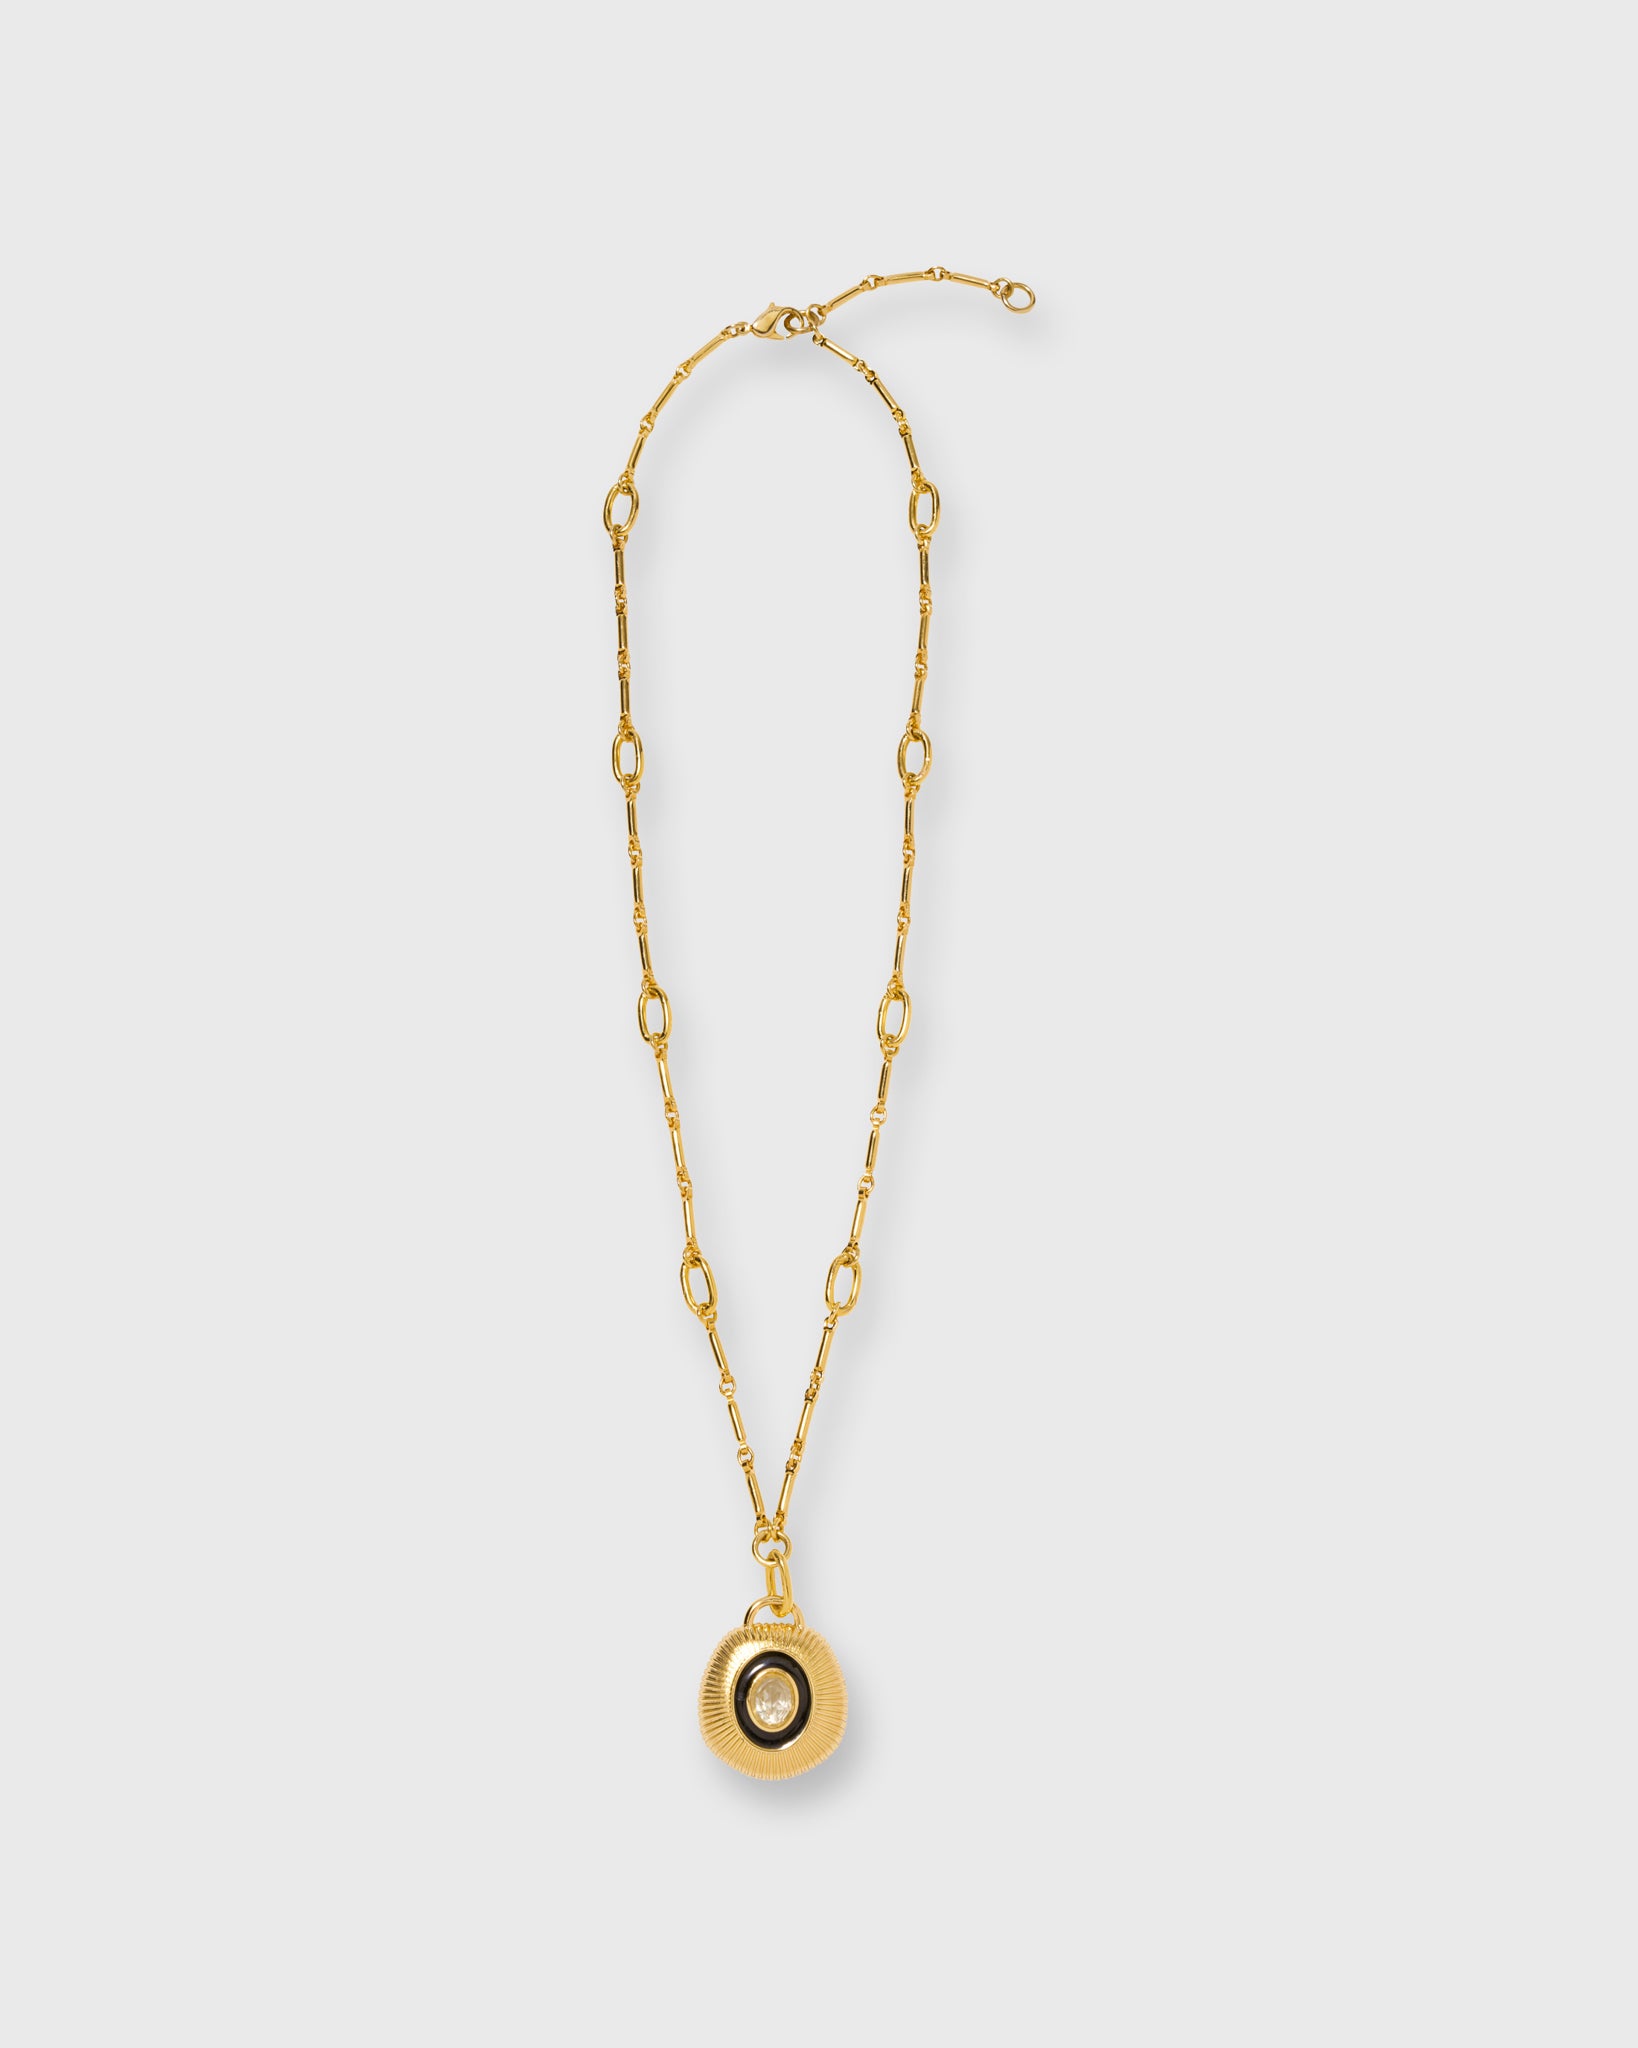 Celestial Pendant Necklace in Gold